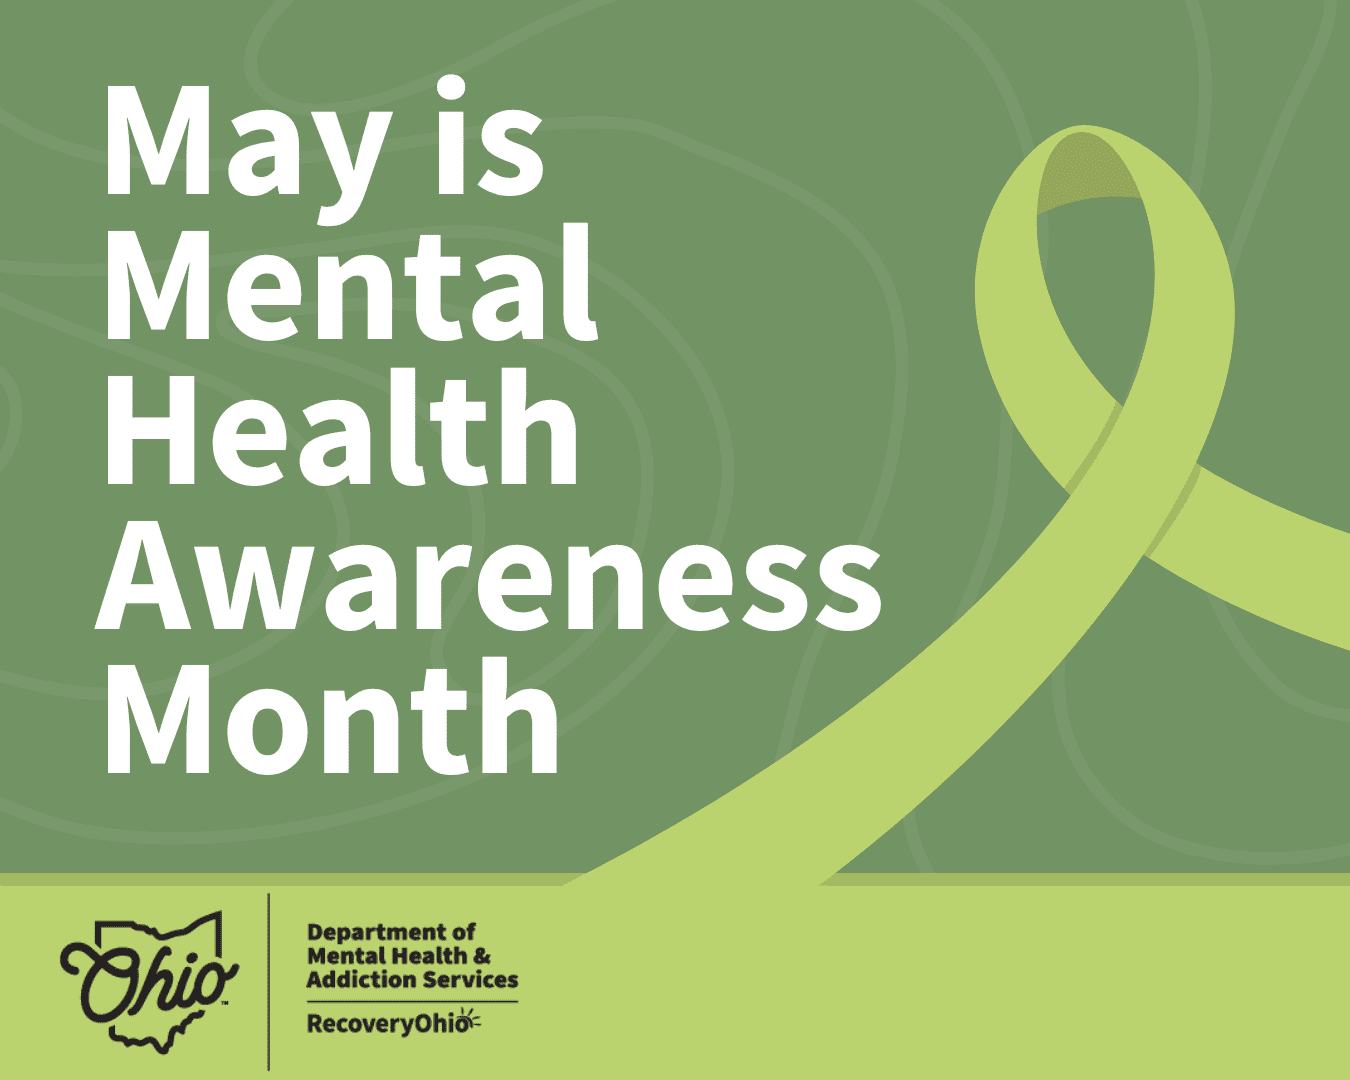 May is mental health awareness month with a green ribbon and the Ohio Department of addiction logo